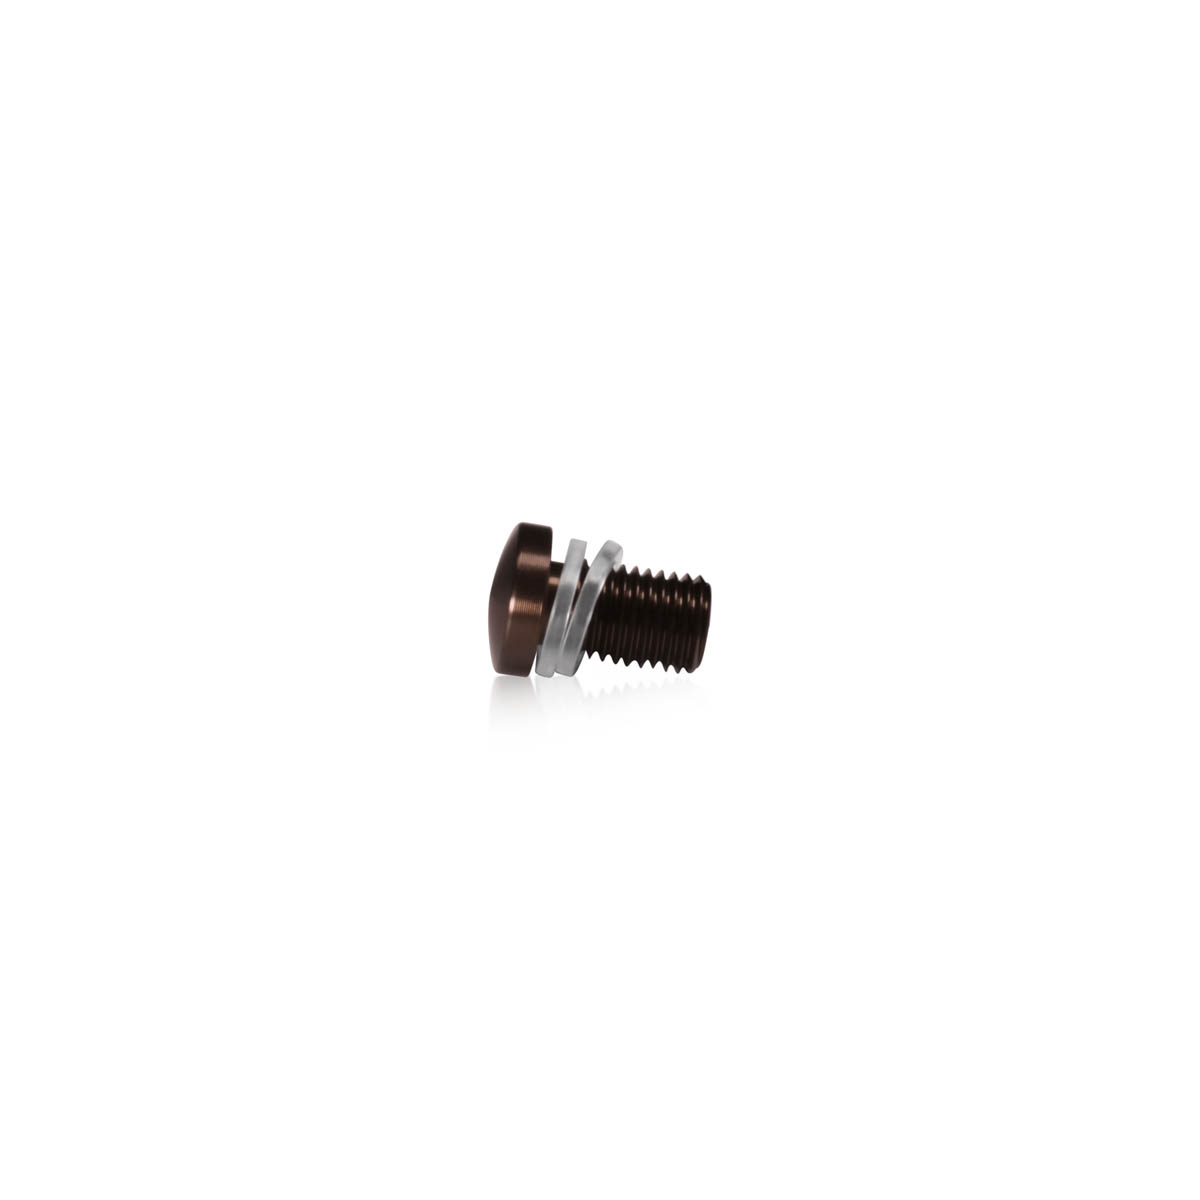 AL12-12AB Head replacement for Mbs-Standoffs 1/2'' Diameter x 1/2'' Barrel Length, Aluminum Bronze Anodized Finish Standoffs (Includes 2 Silicone Washers).